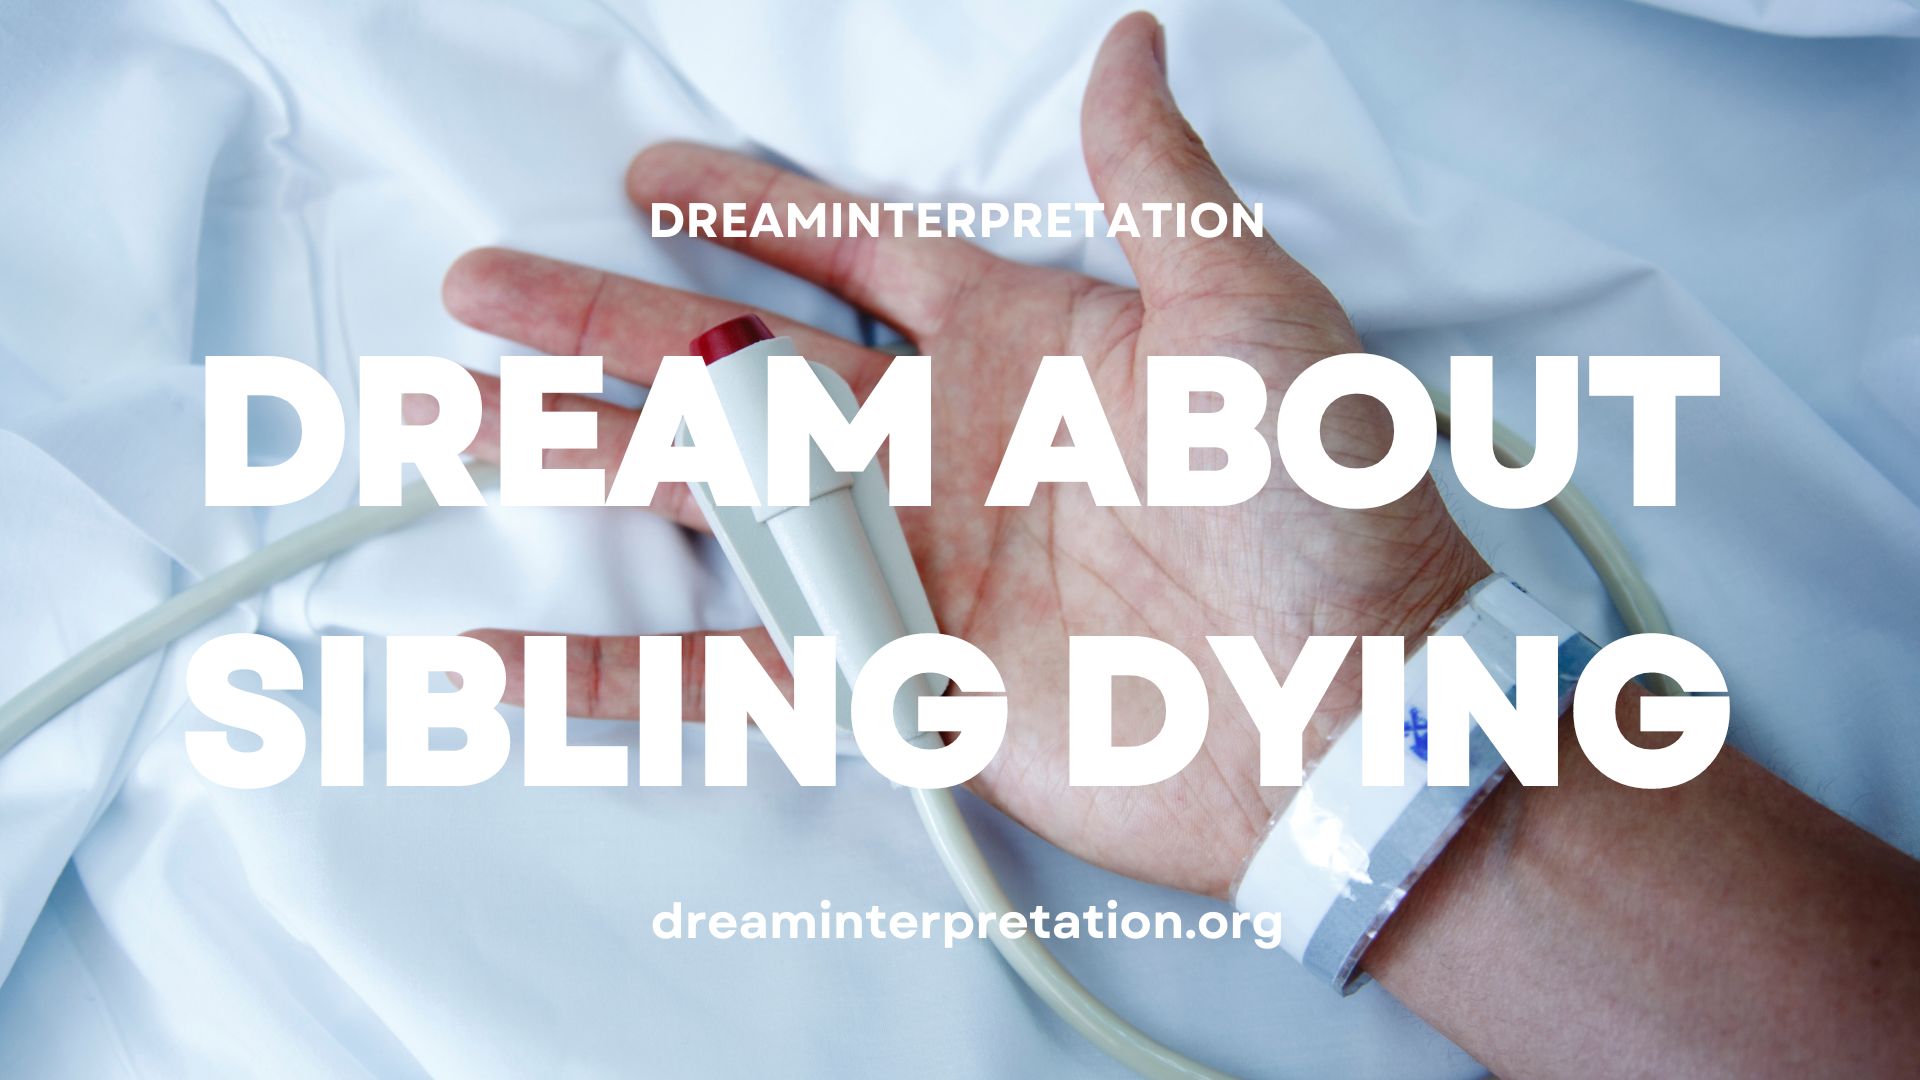 Dream About Sibling Dying